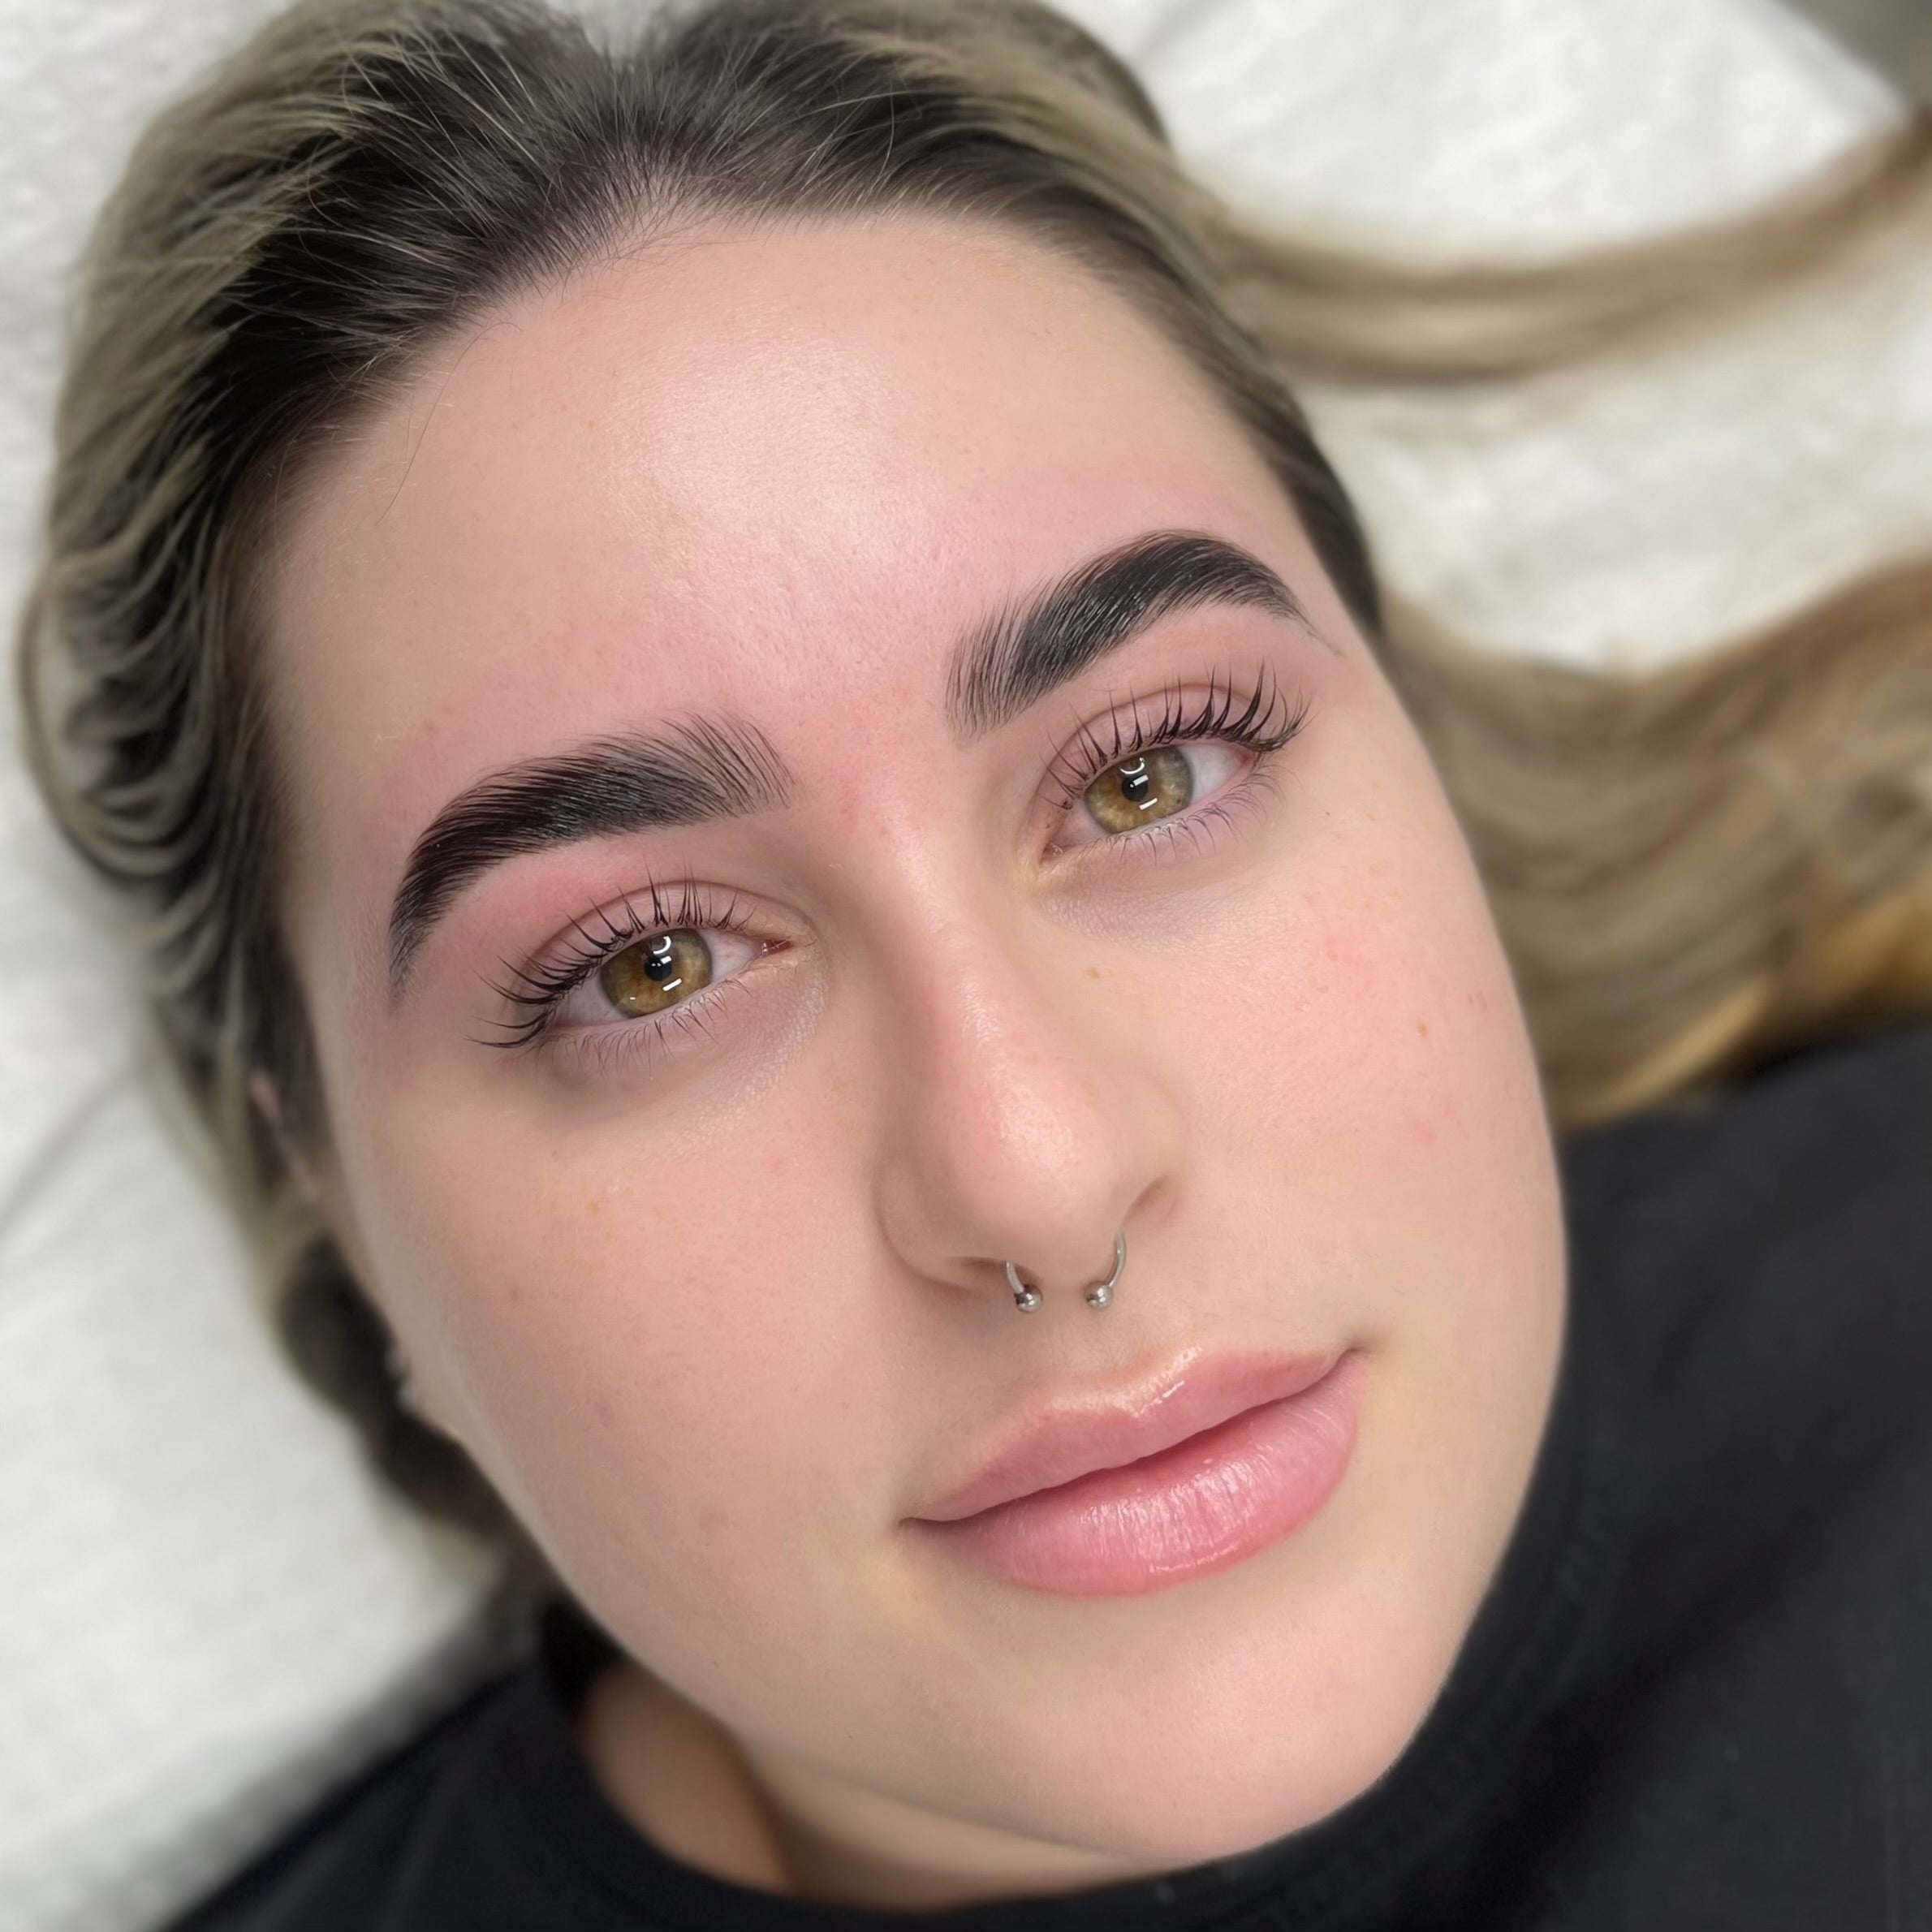 We are Brisbane Northside's most talented Lash and Brow Artists.  With 6+ years experience we will be able to transform your beauty needs. Come and visit us for an appointment and enjoy a relaxing and private experience. www.beautyphix.com.au